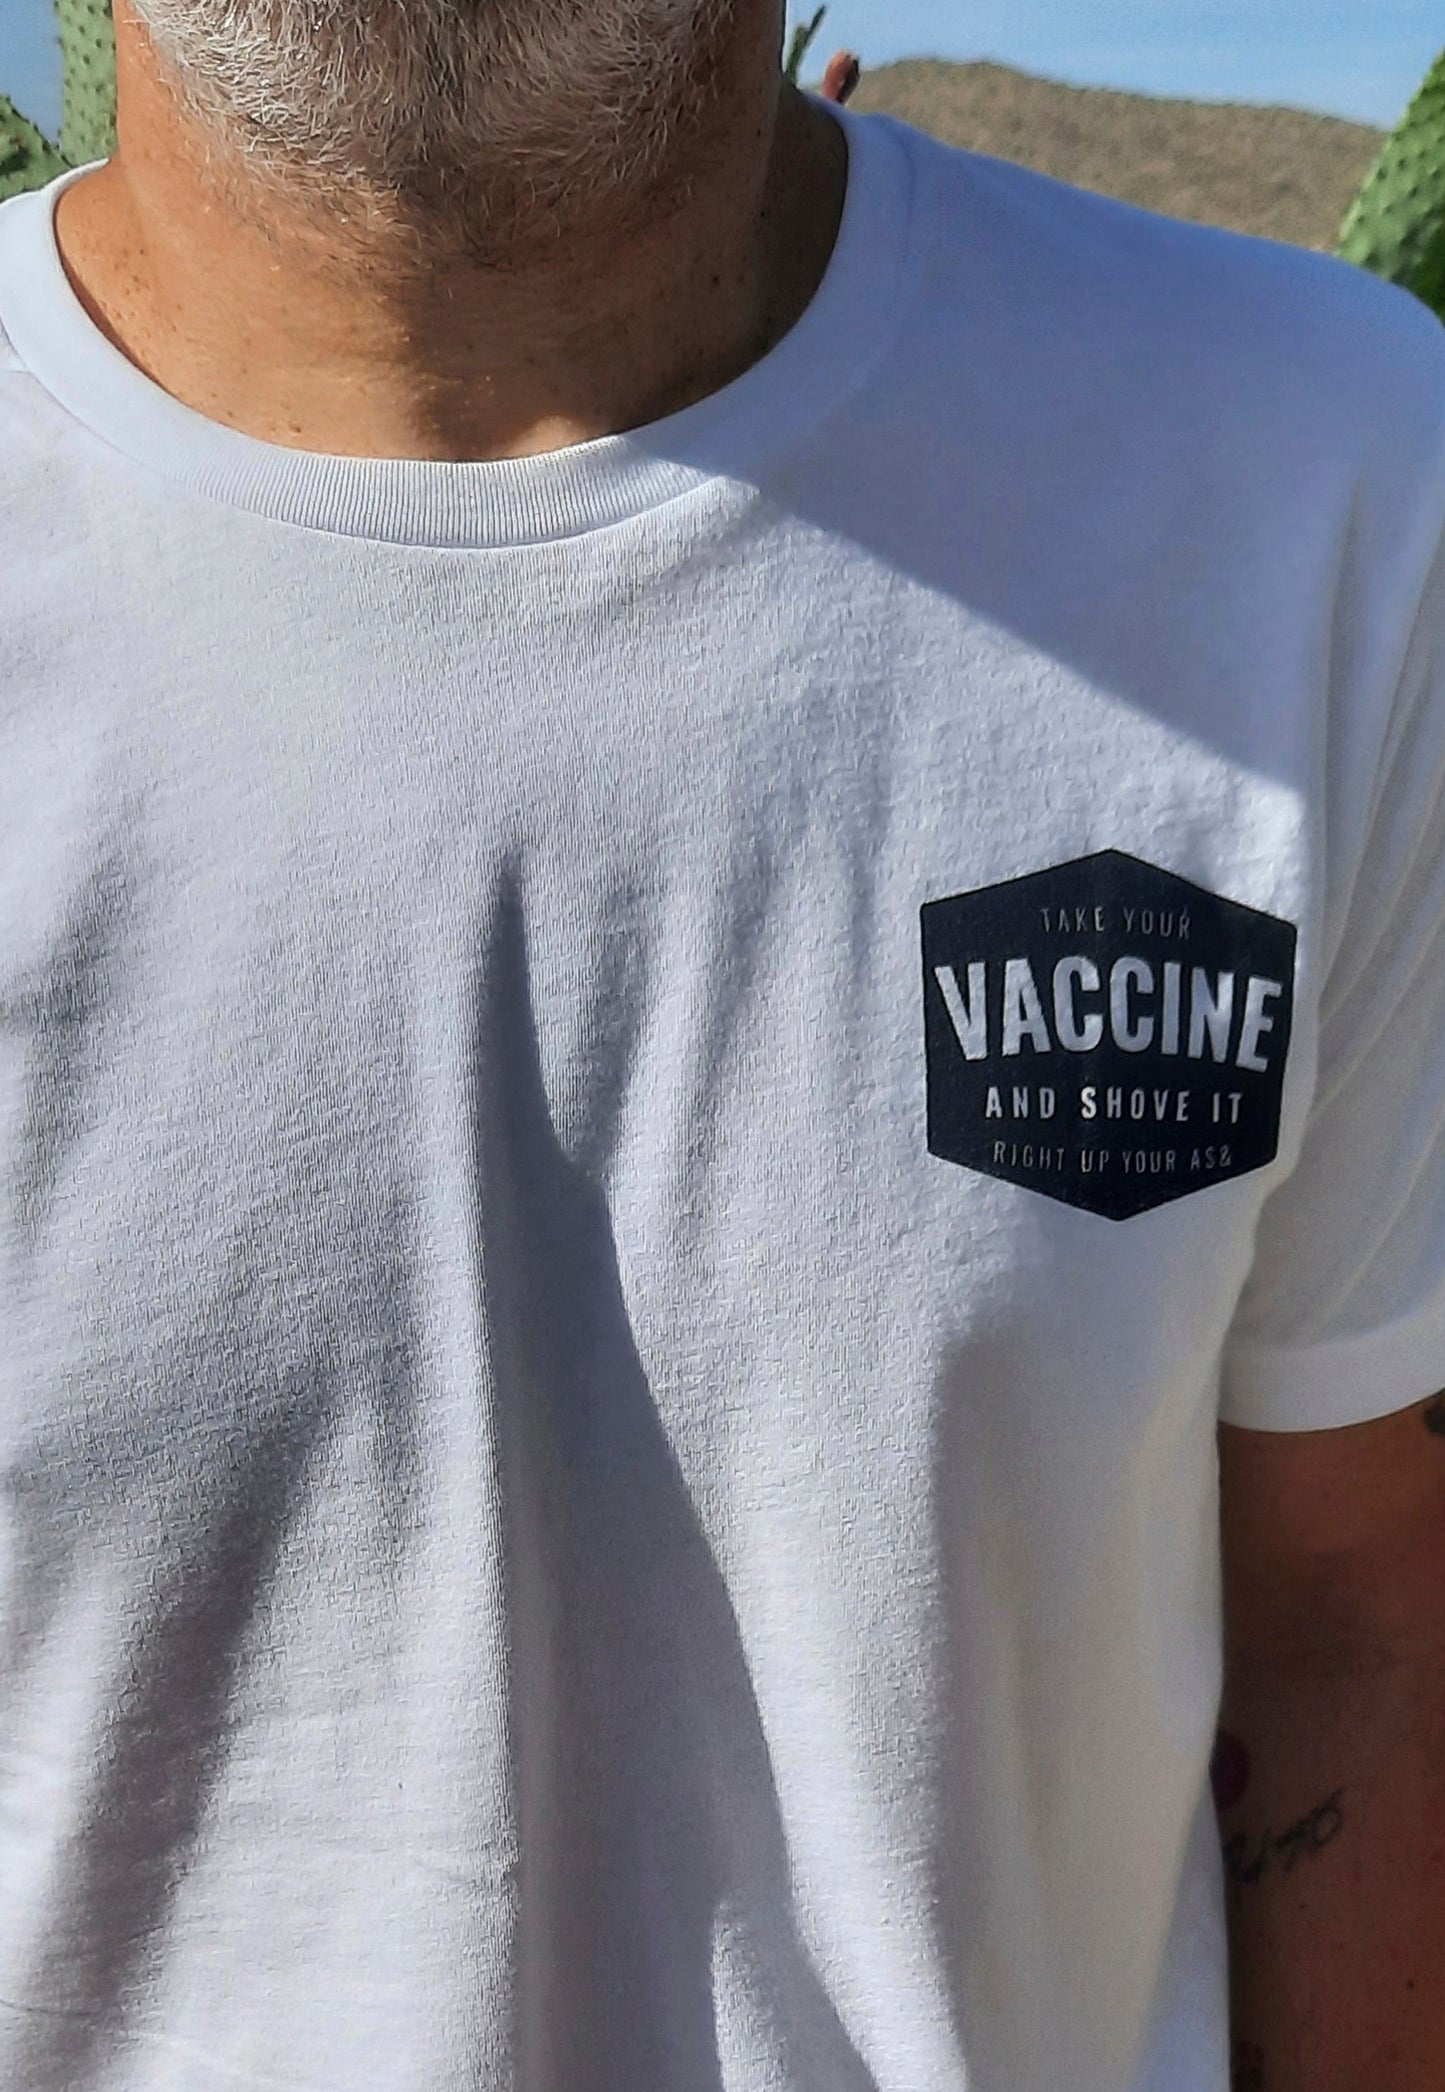 Shove Your Vax up Your A$$ t-shirt